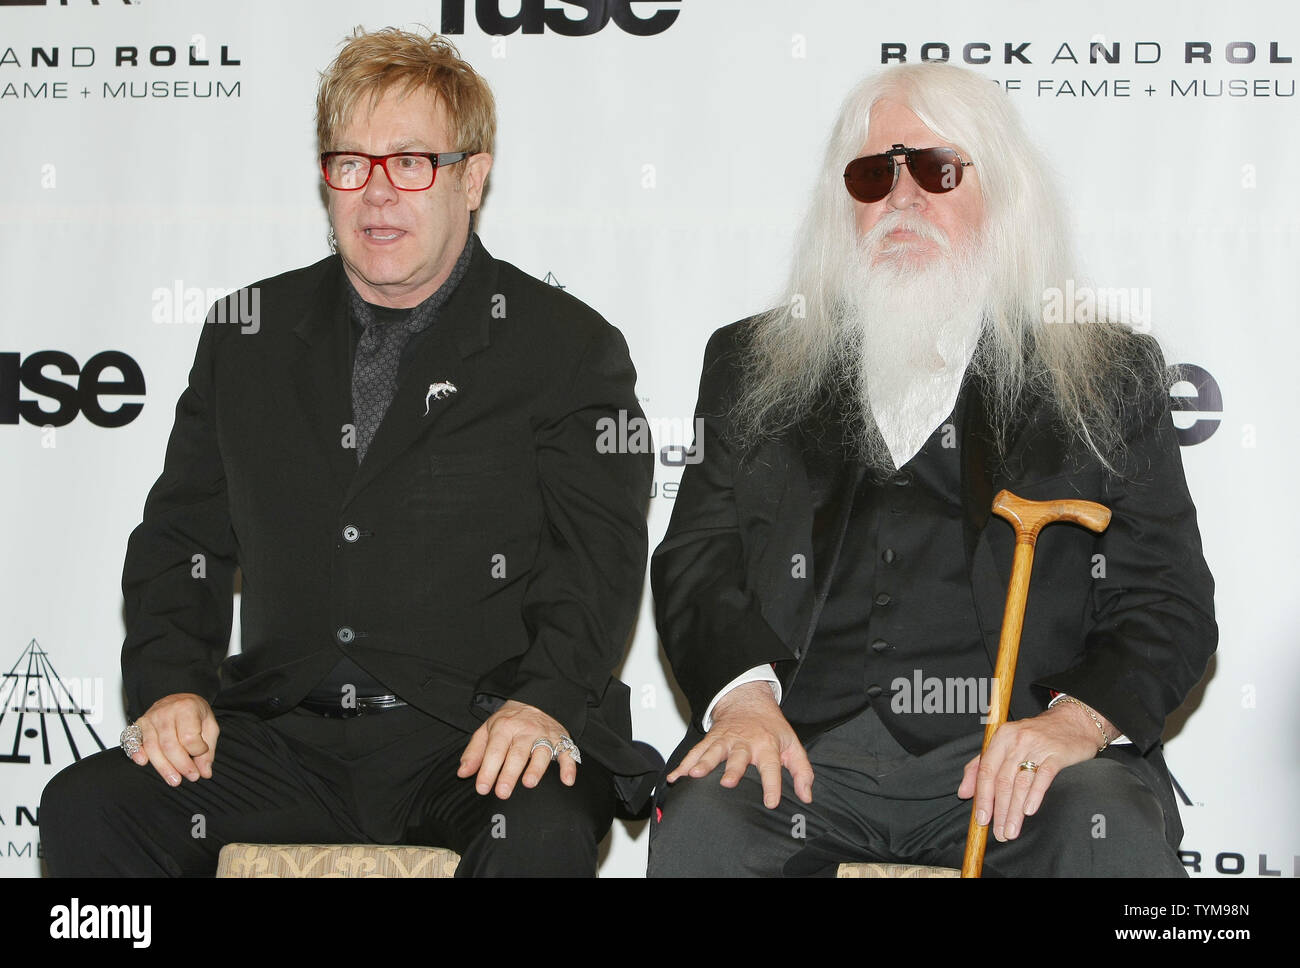 Elton John (L) answers reporters' questions as inductee Leon Russell listens at the Rock and Roll Hall of Fame induction ceremony held at the Waldorf-Astoria hotel in New York on March 14, 2011.      UPI Photo/Monika Graff... Stock Photo